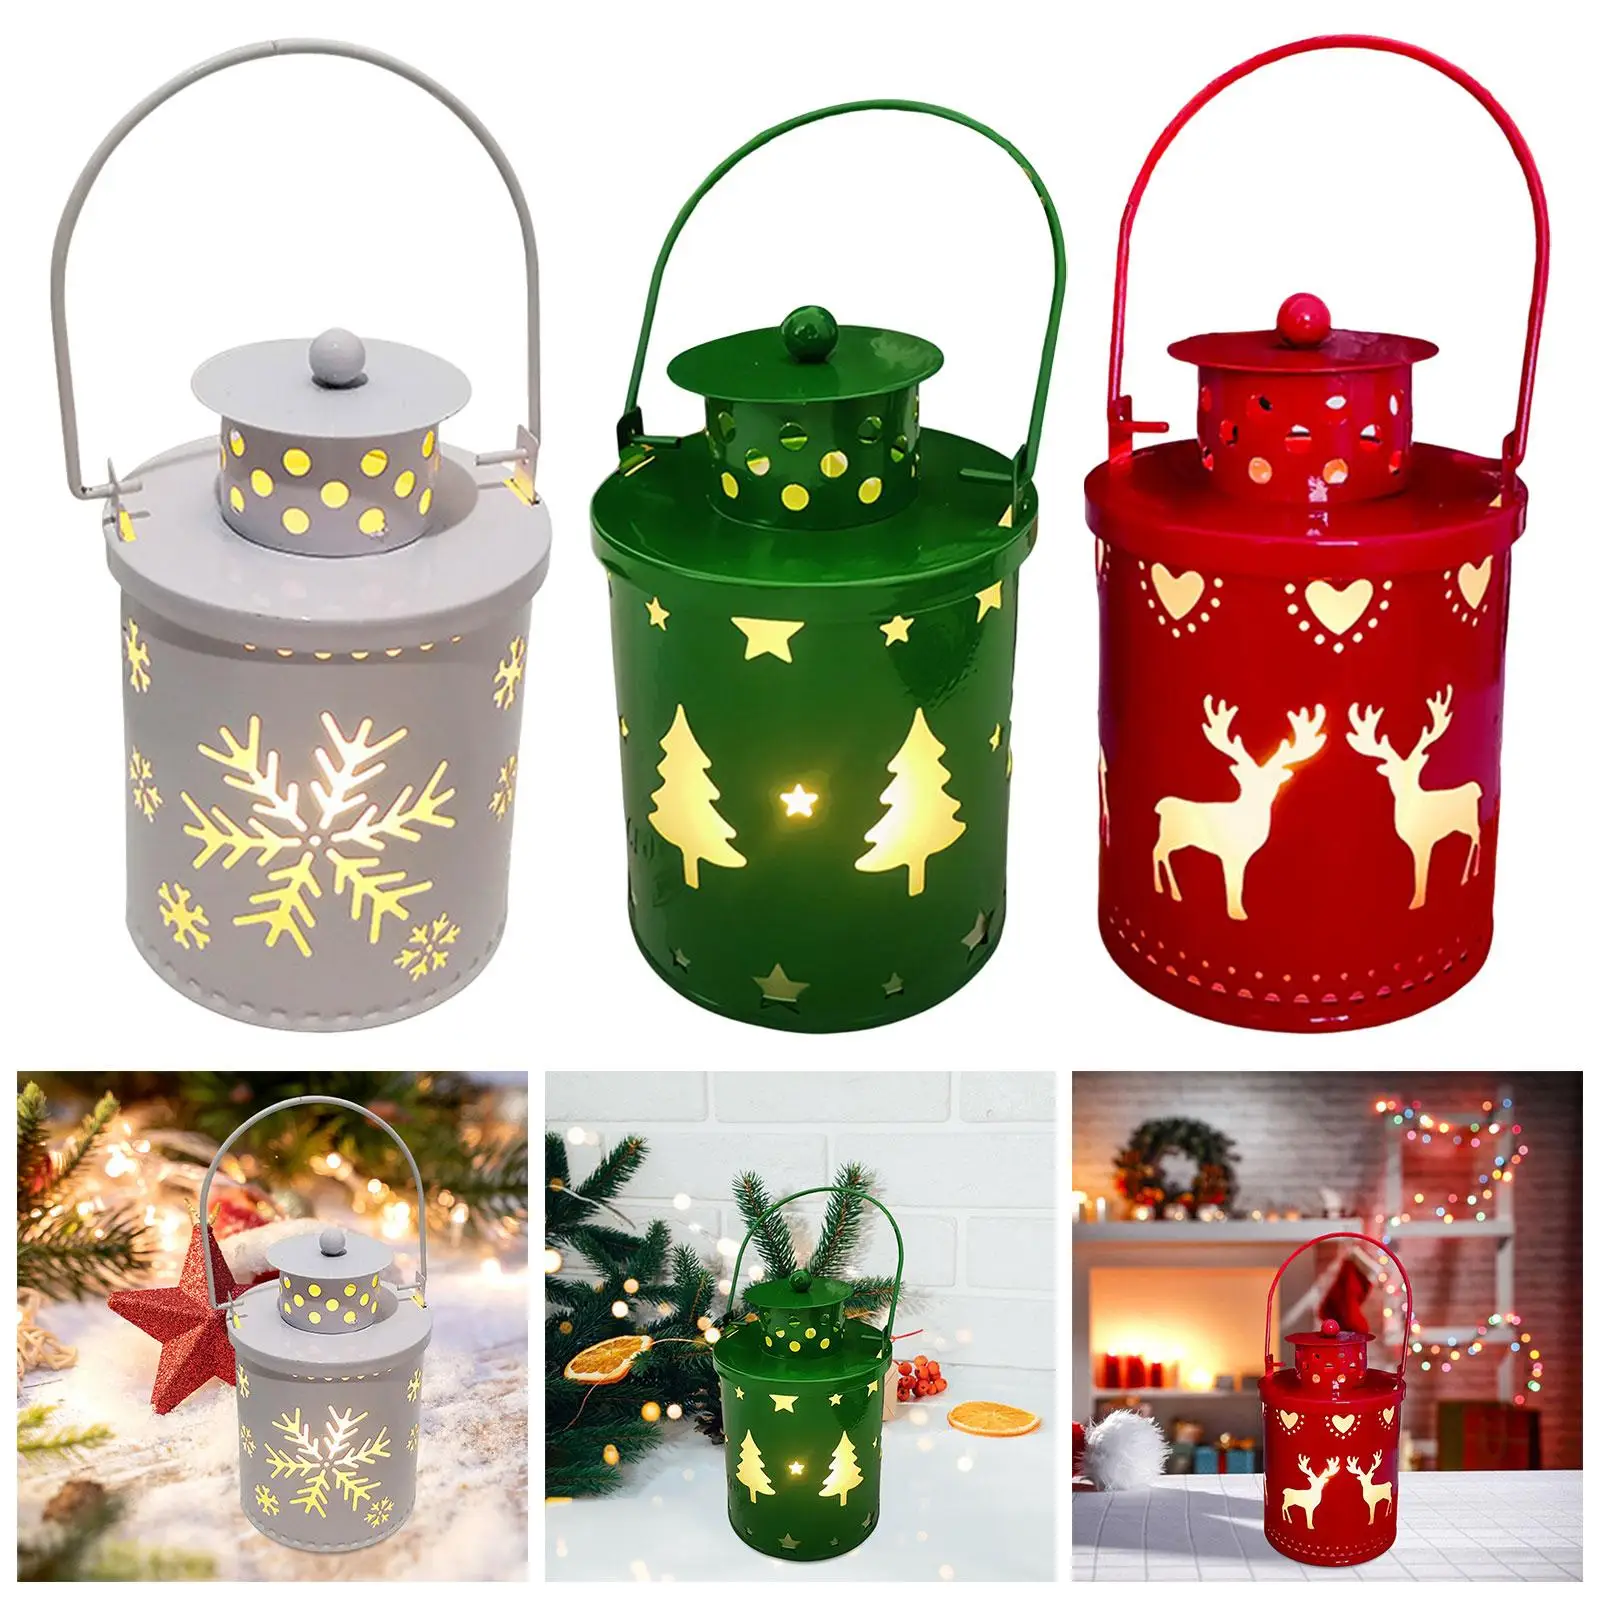 Candle Lantern Nightlight Lighting Christmas Lighted Lantern Flameless Candle Light for Holidays Xmas Festival Party Tabletop